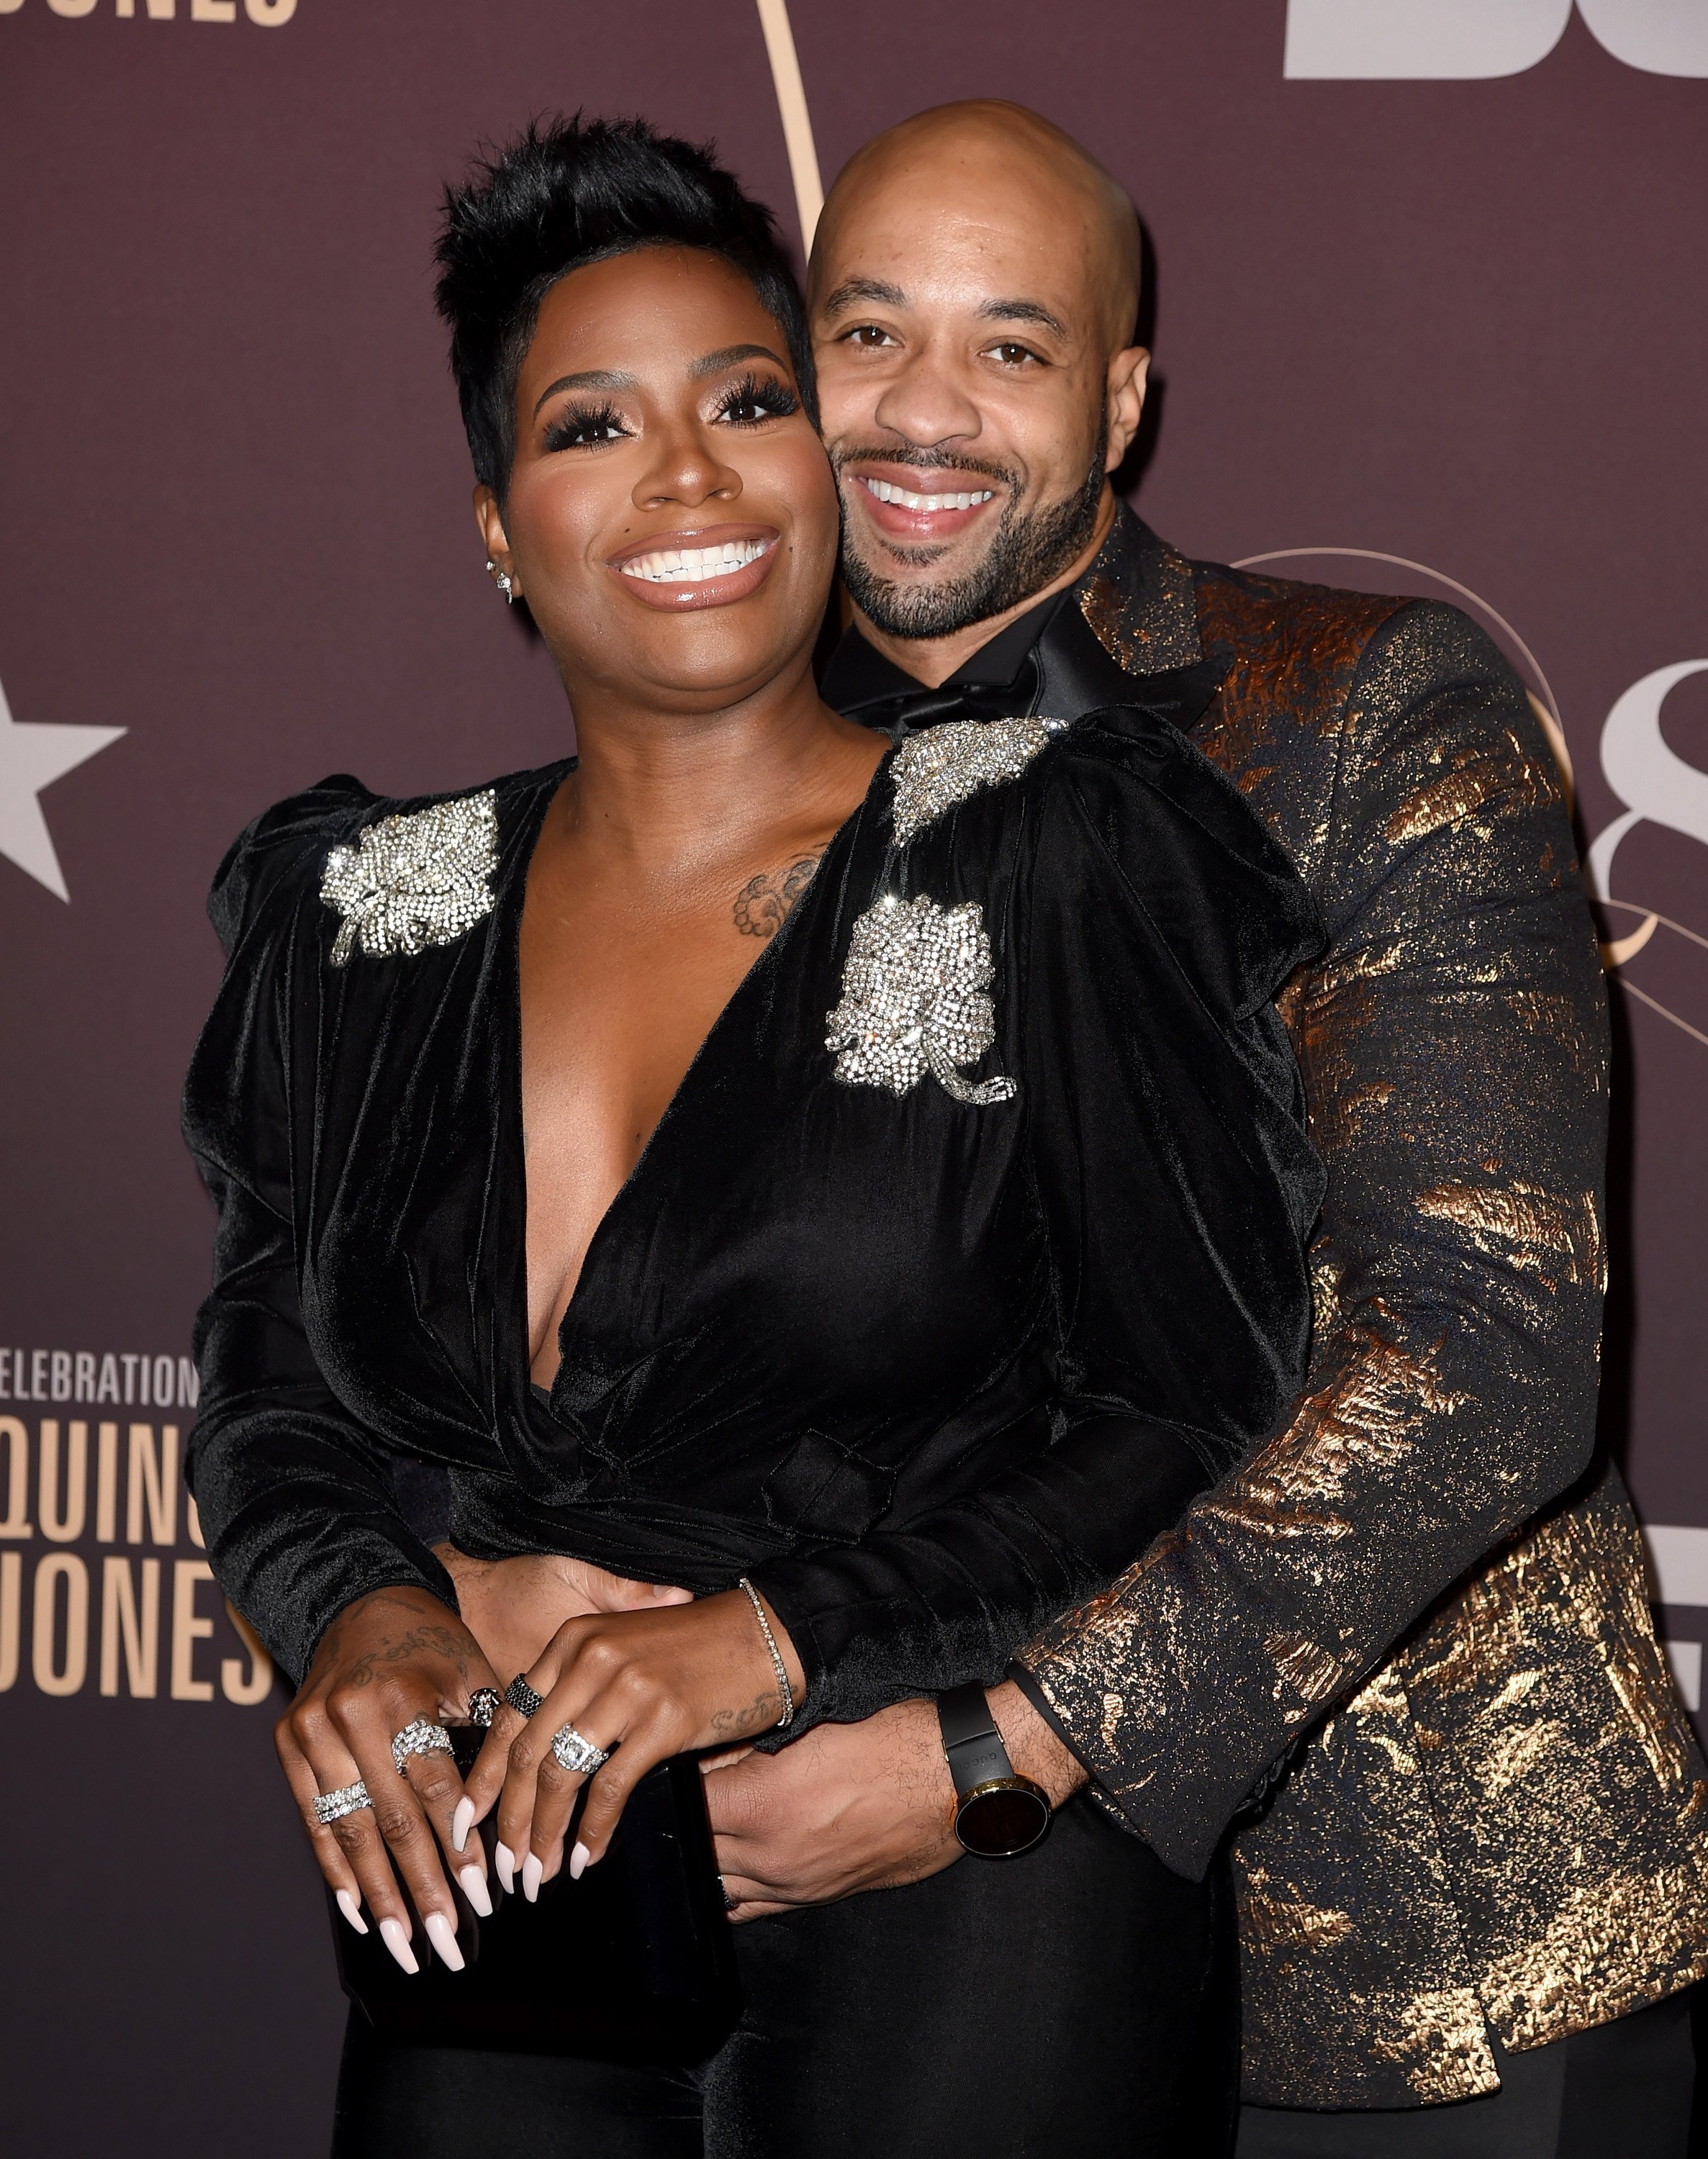 Fantasia Barrino and her husband Kendall Taylor arrive at Q85: A Musical Celebration for Quincy Jones at the Microsoft Theatre on September 25, 2018. | Photo: Getty Images